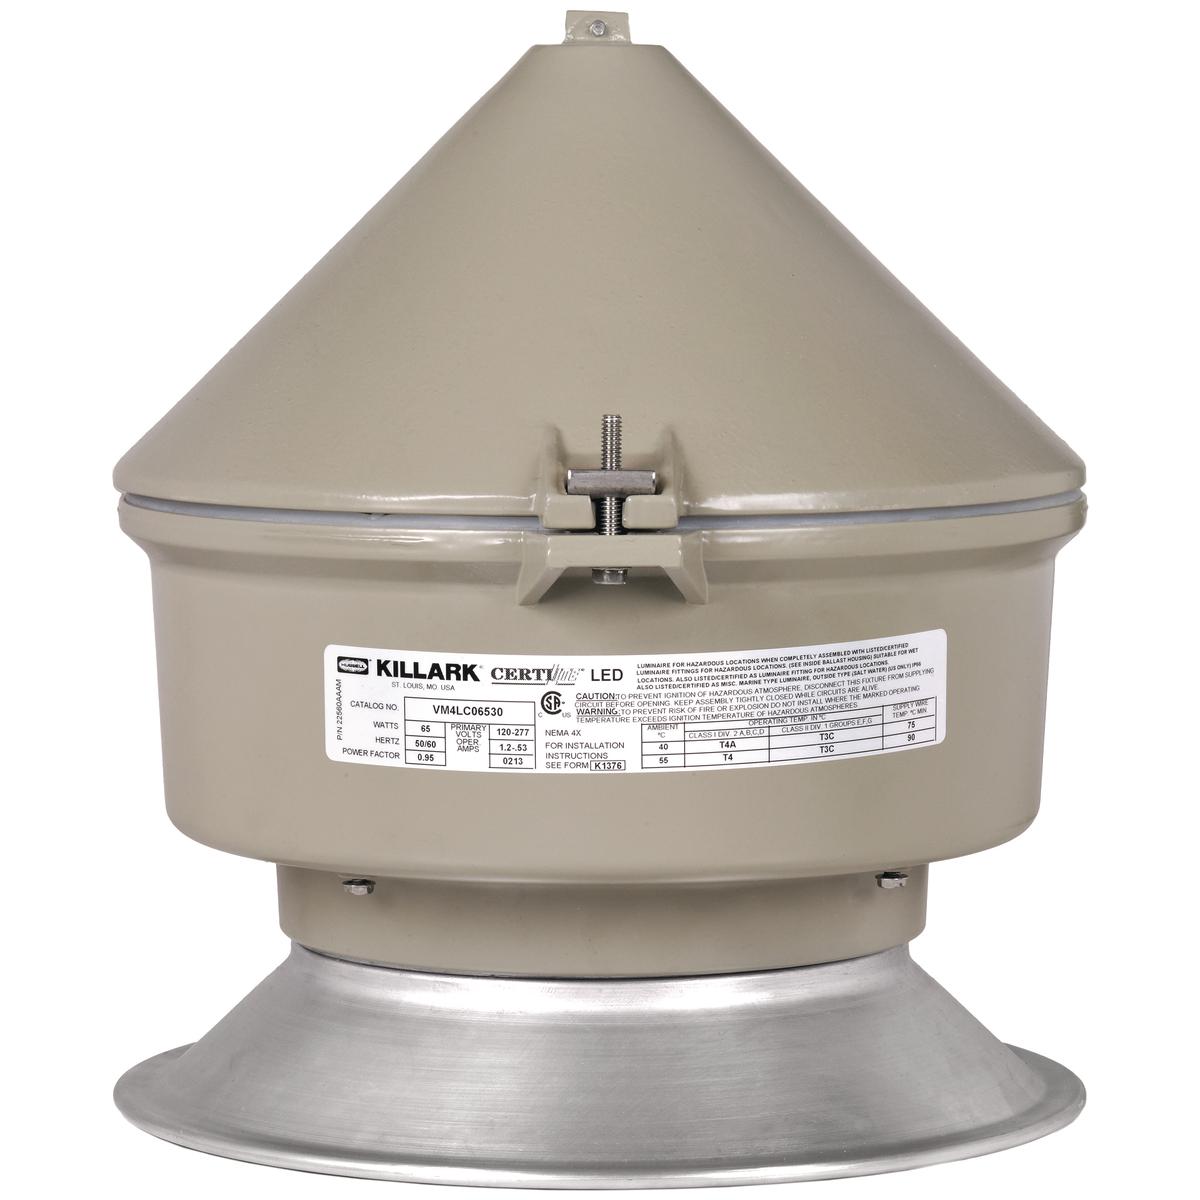 Hubbell VM4LC1830C2PF VM4LC 120-277V 3/4" Cone Top Mount Flat Polycarbonate with Guard  ; Supplemental 20KA/10KV Surge Protection is standard for 120-277 VAC models & 10KA/10KV Surge Protection is standard for 347-480 VAC models. ; Traditional Industrial Appearance, Suitabilit